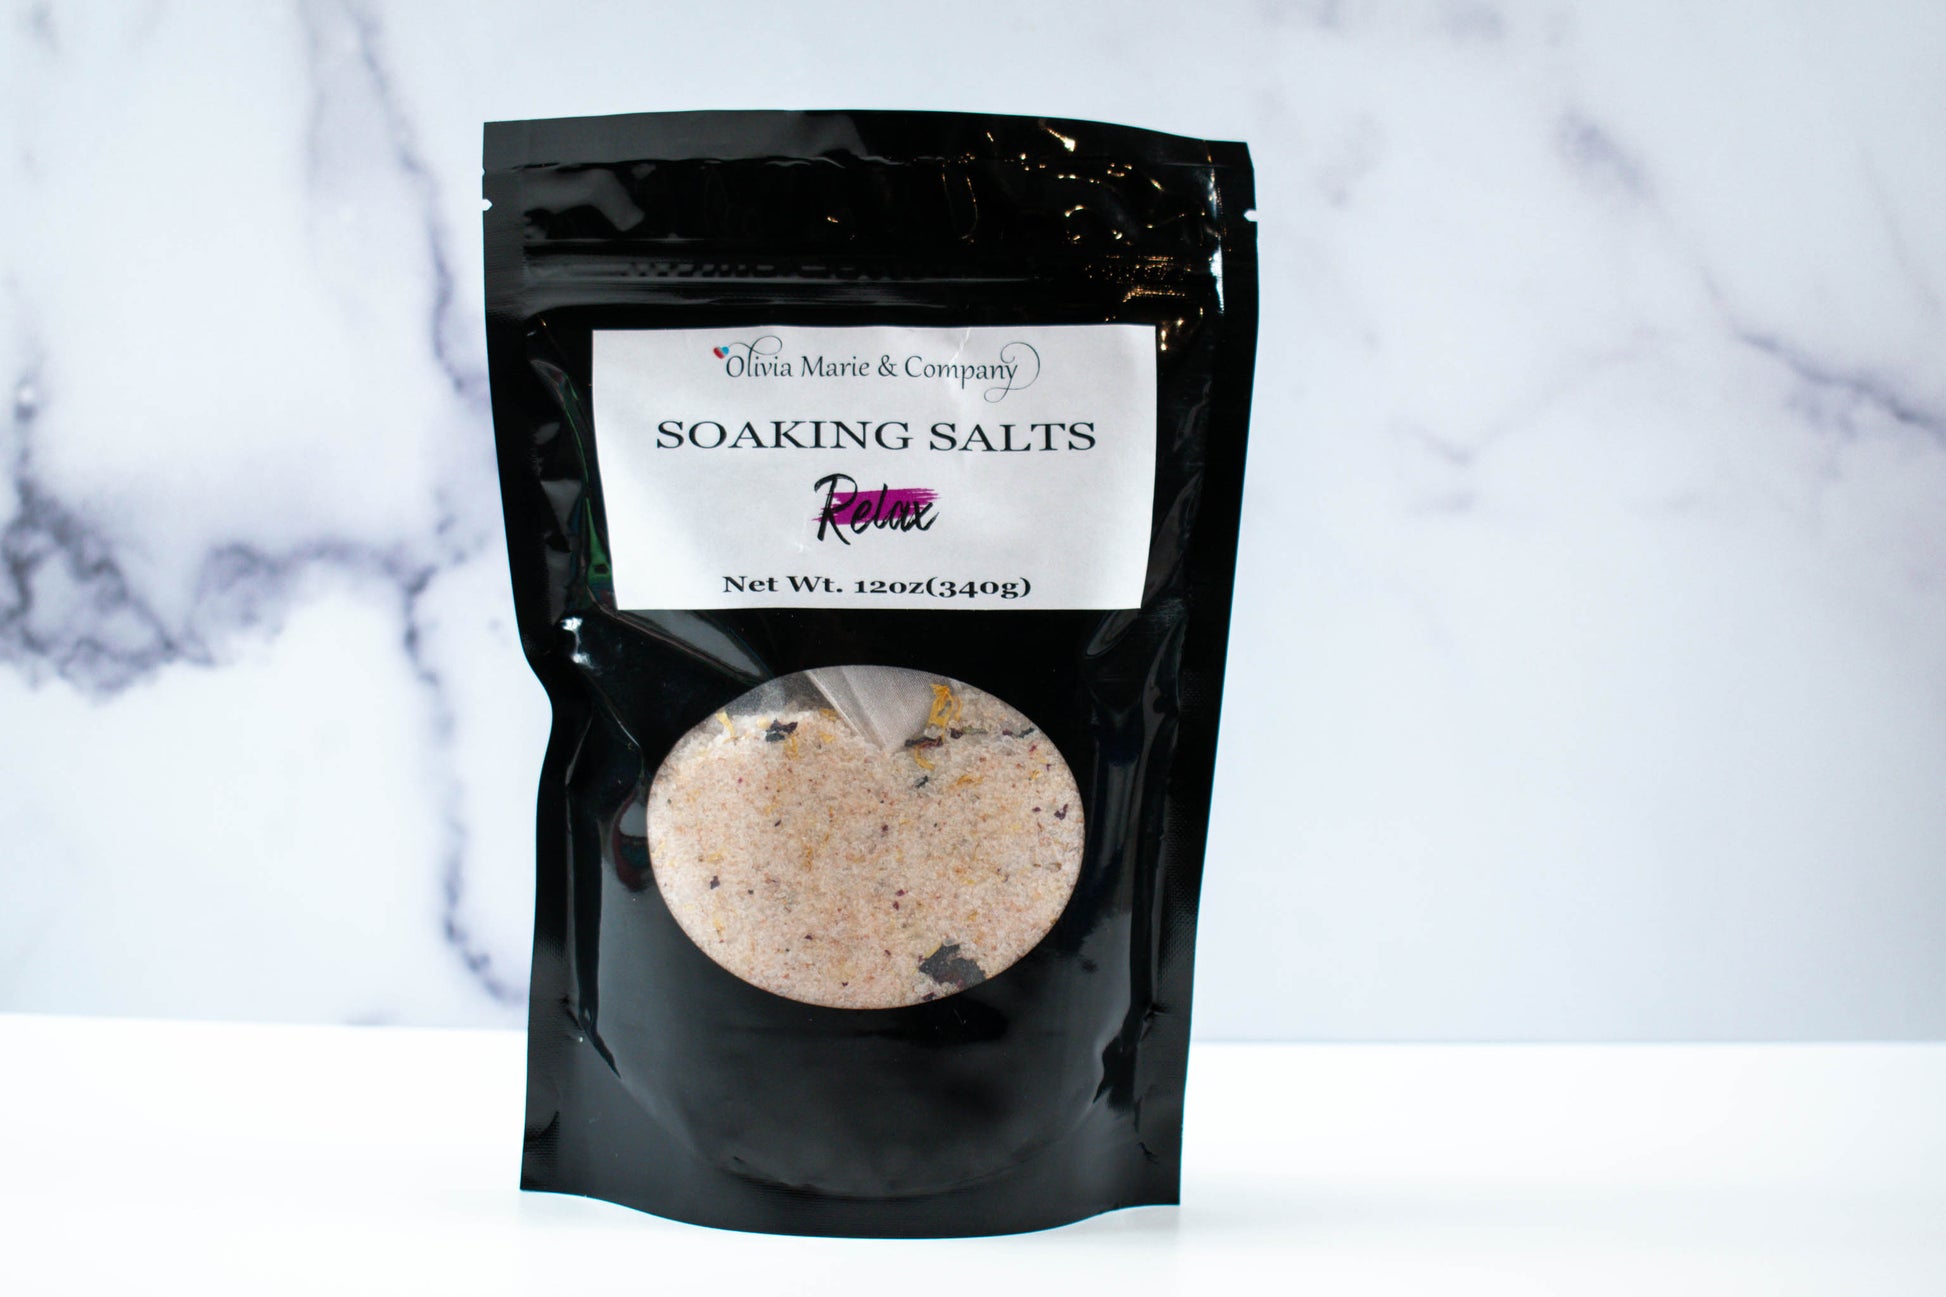 Relax Soaking Salts in a black bag with a clear window to show the salts.